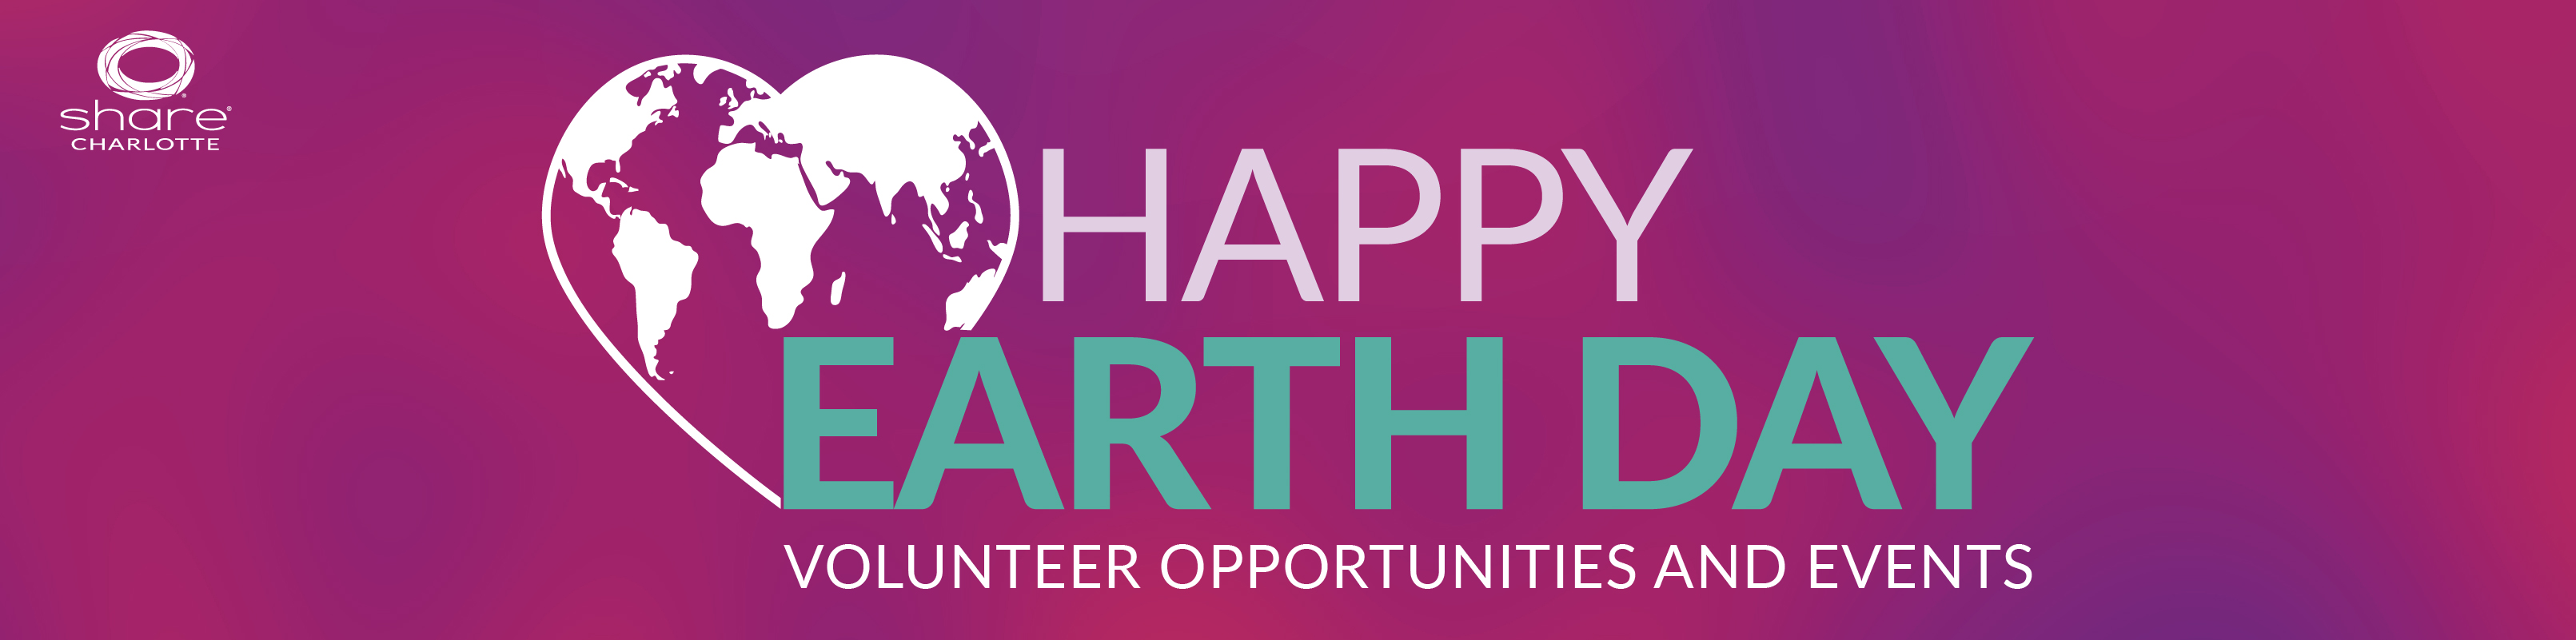 Earth Day Volunteer Opportunities SHARE Charlotte